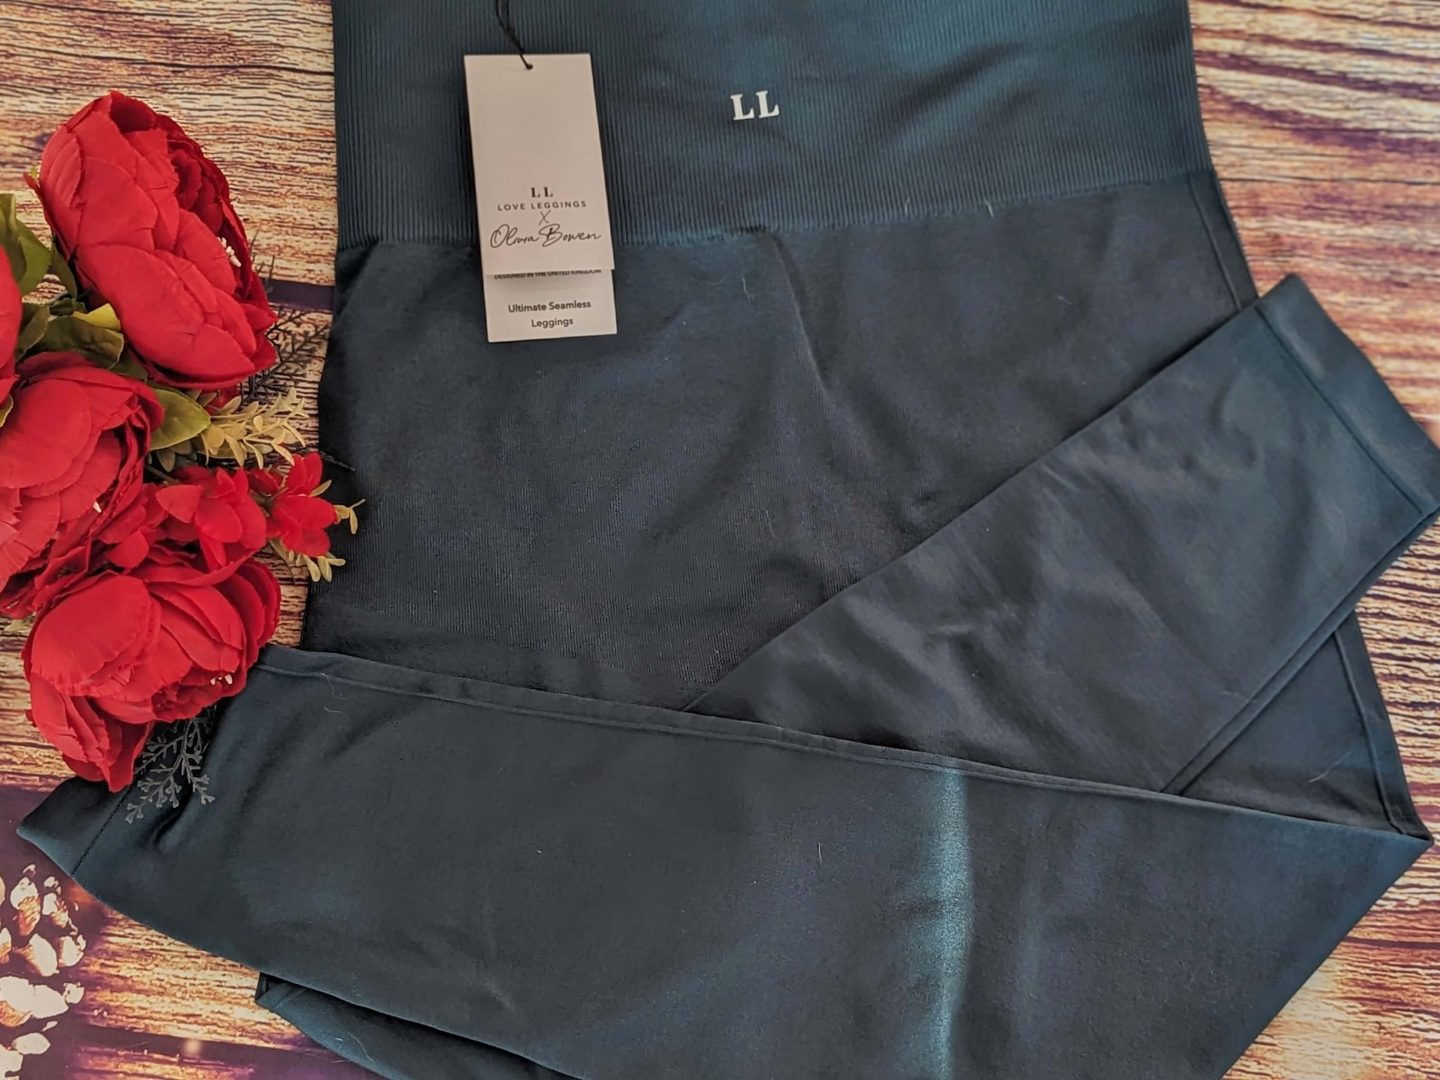 Aqua coloured high waisted leggings from Lovall displayed against a wooden backdrop with red flowers beside